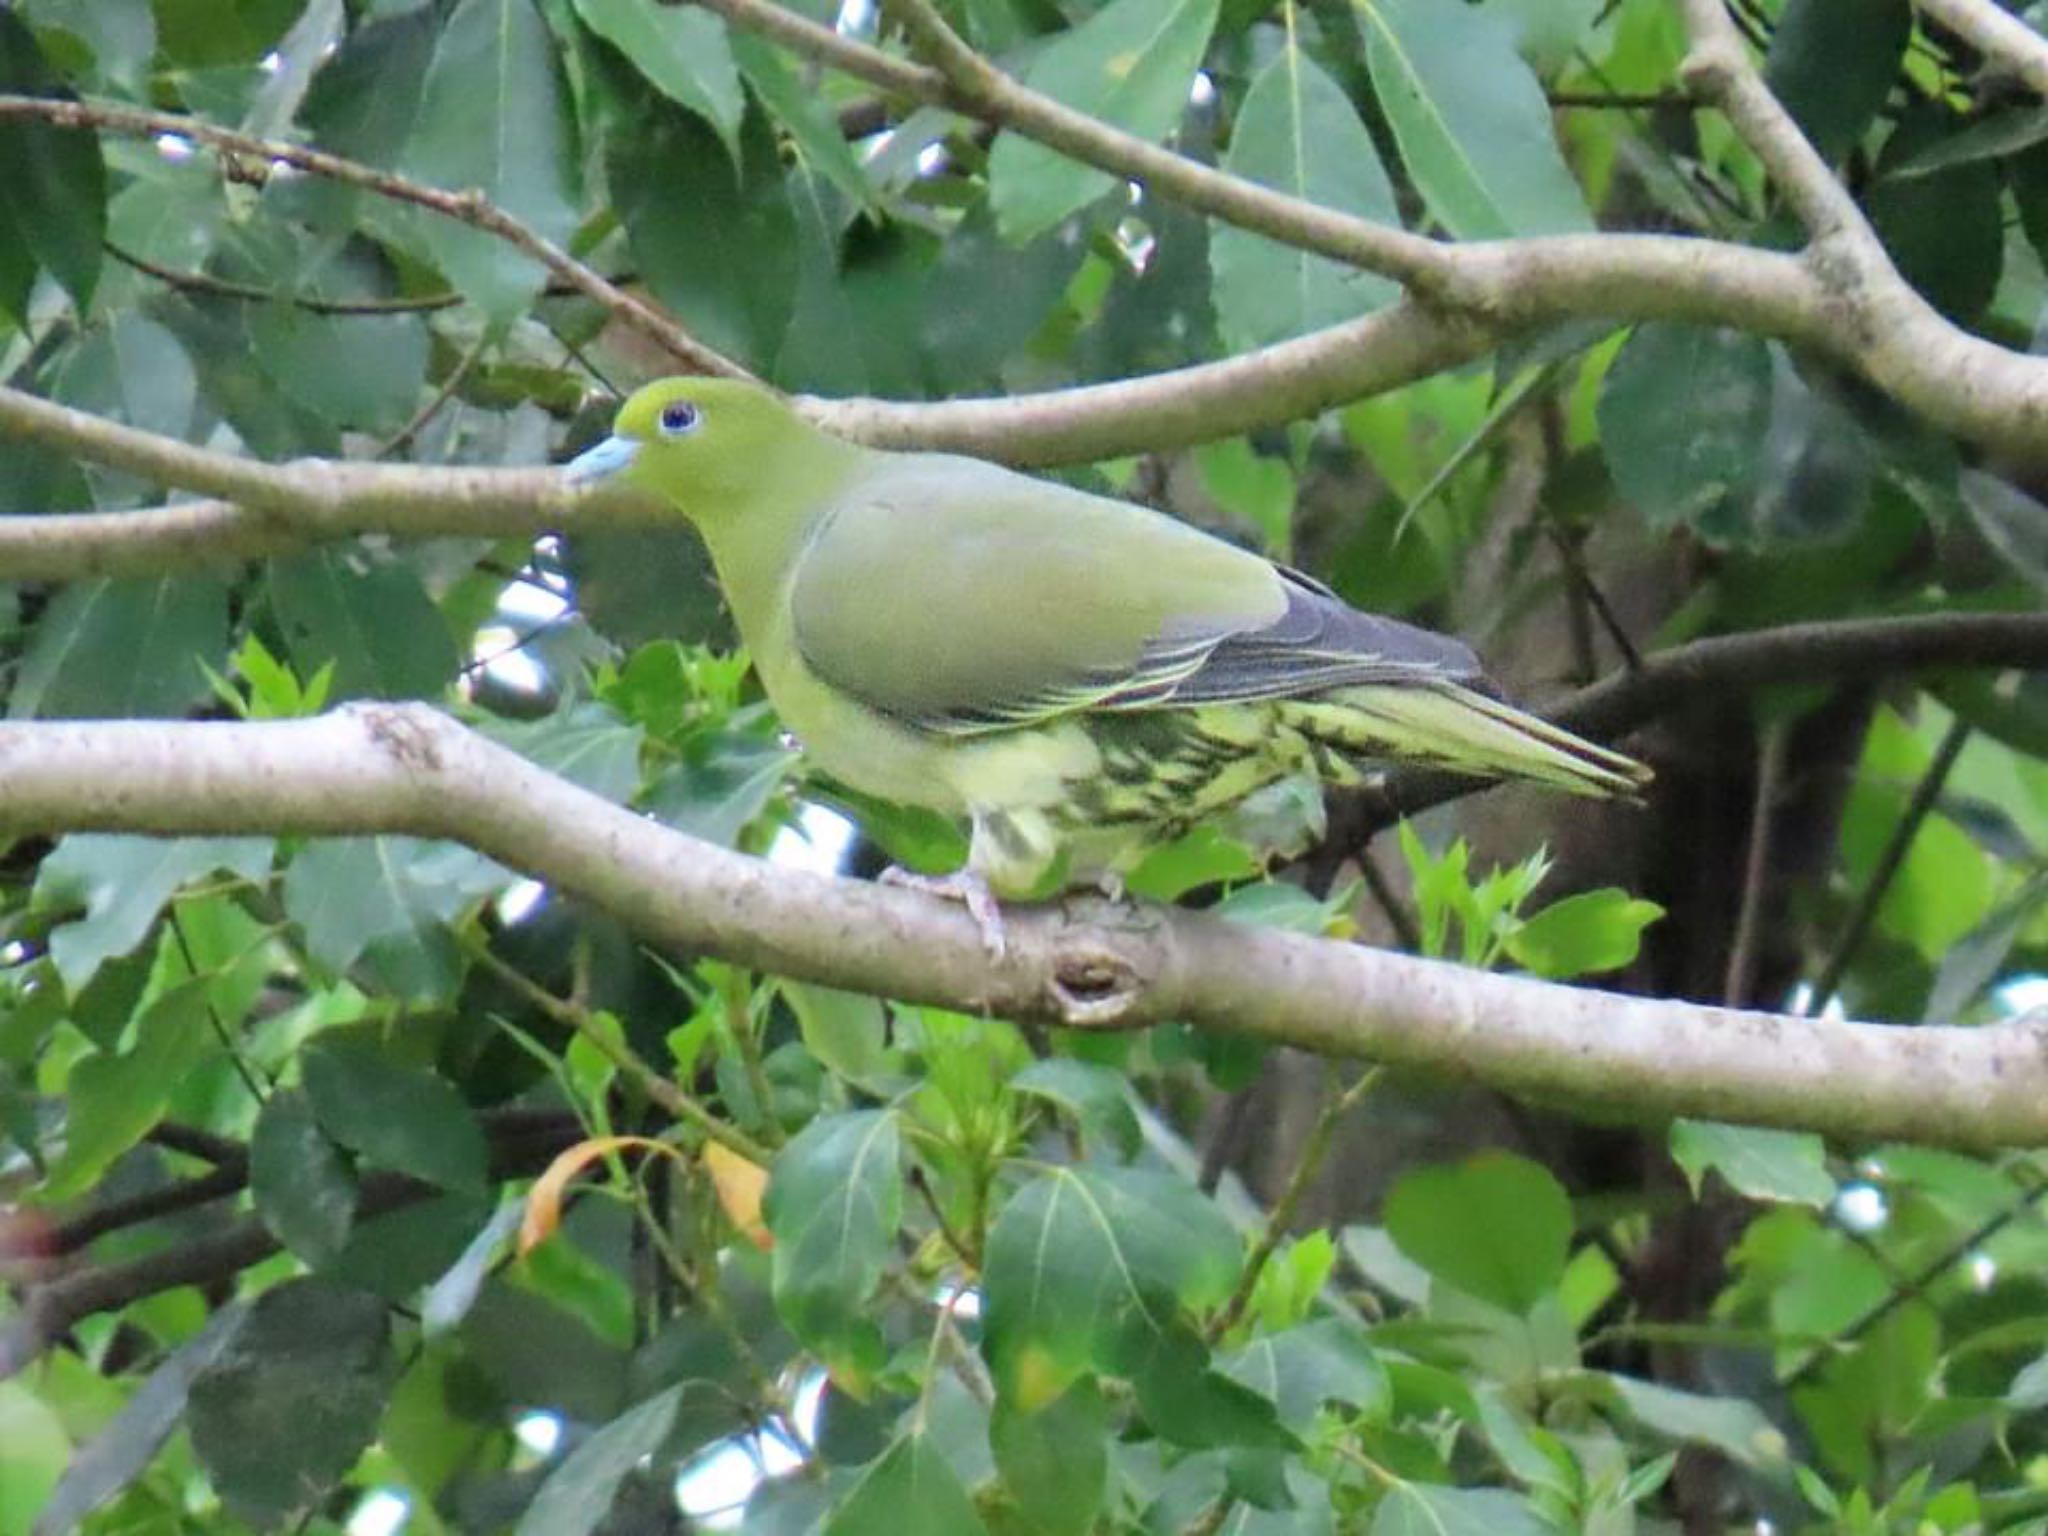 Photo of White-bellied Green Pigeon at Kyoto Gyoen by えりにゃん店長